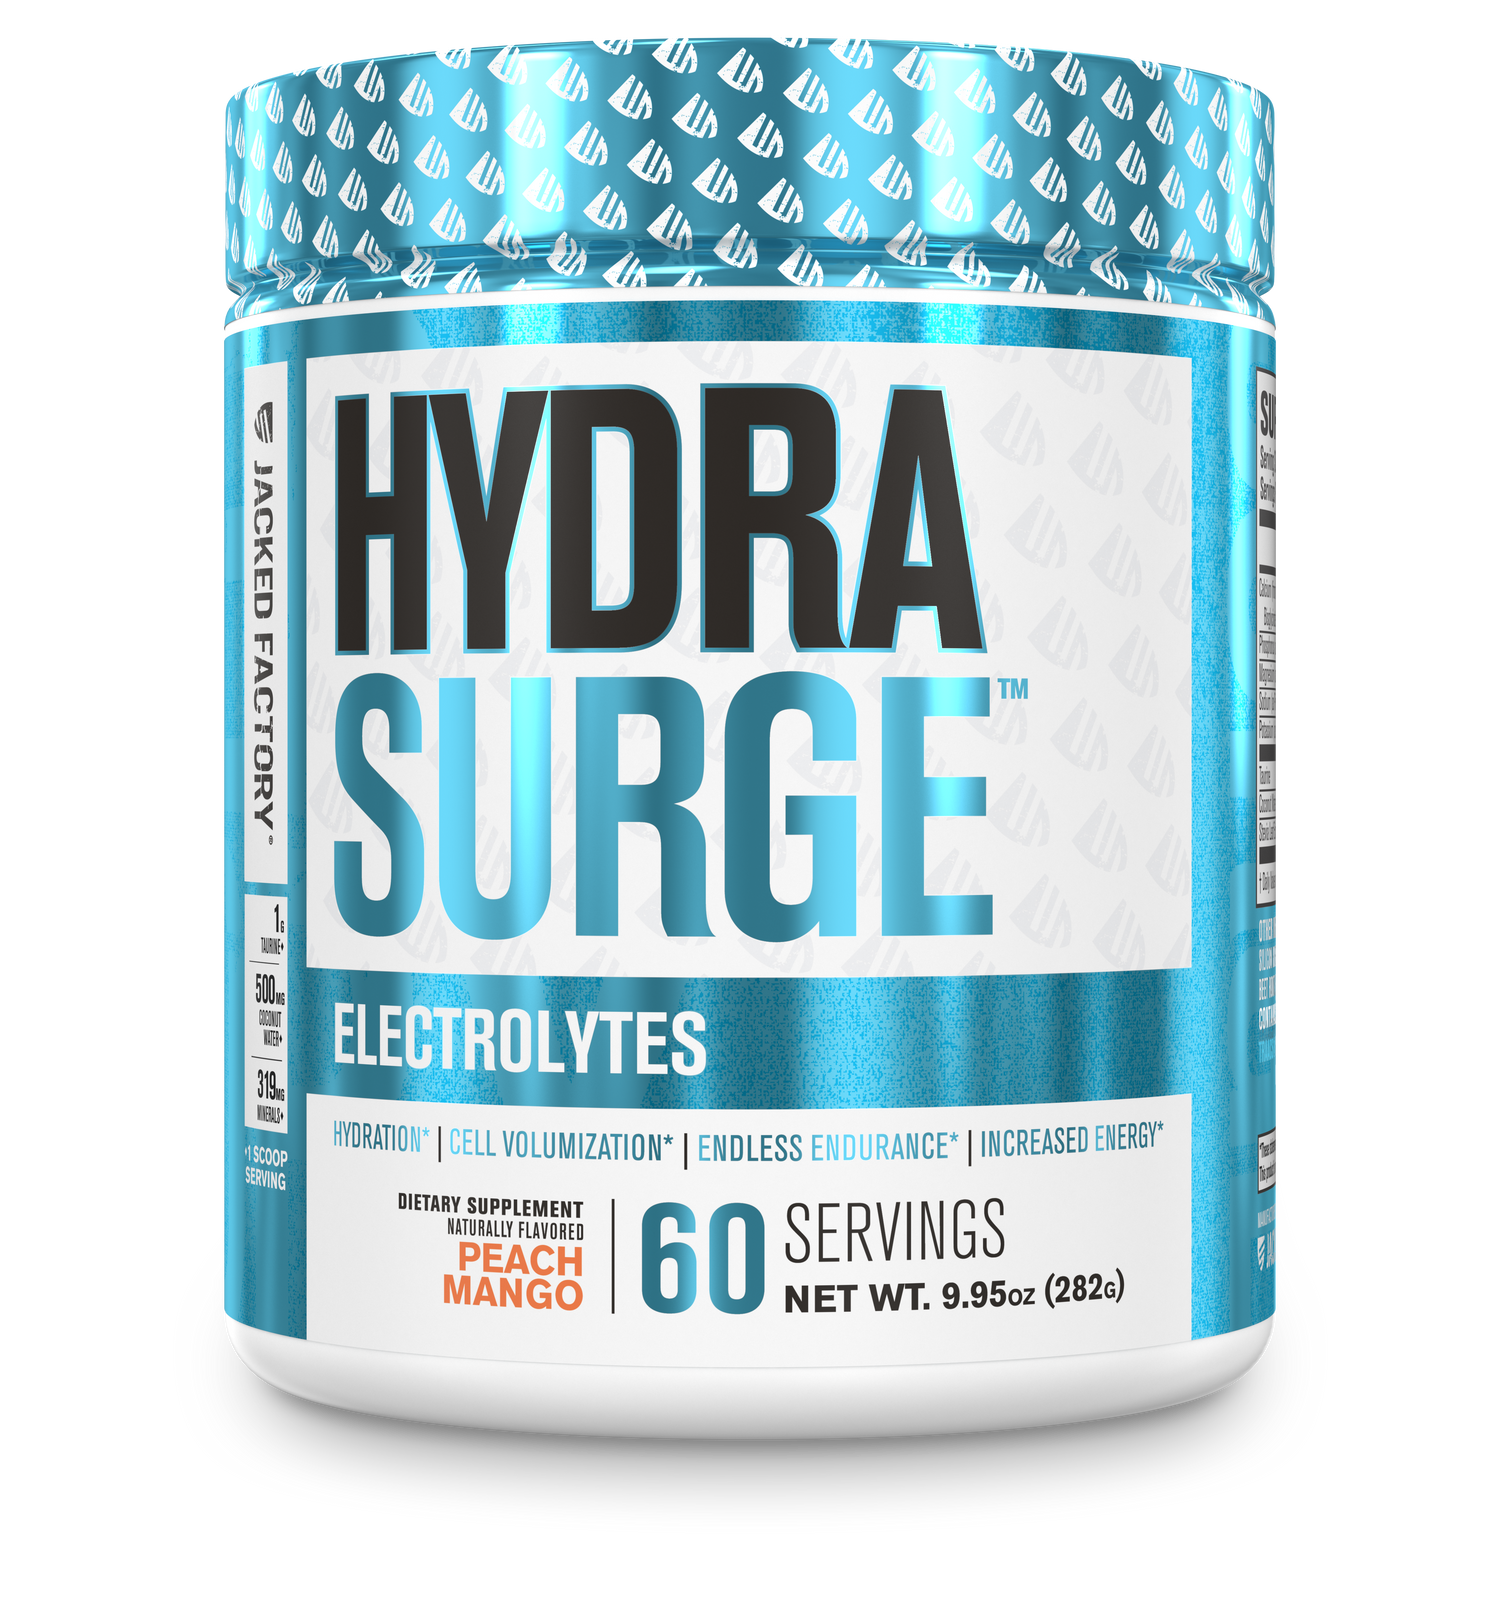 Jacked Factory's Peach Mango Hydrasurge electrolytes powder (60 servings) in a white bottle with light blue label